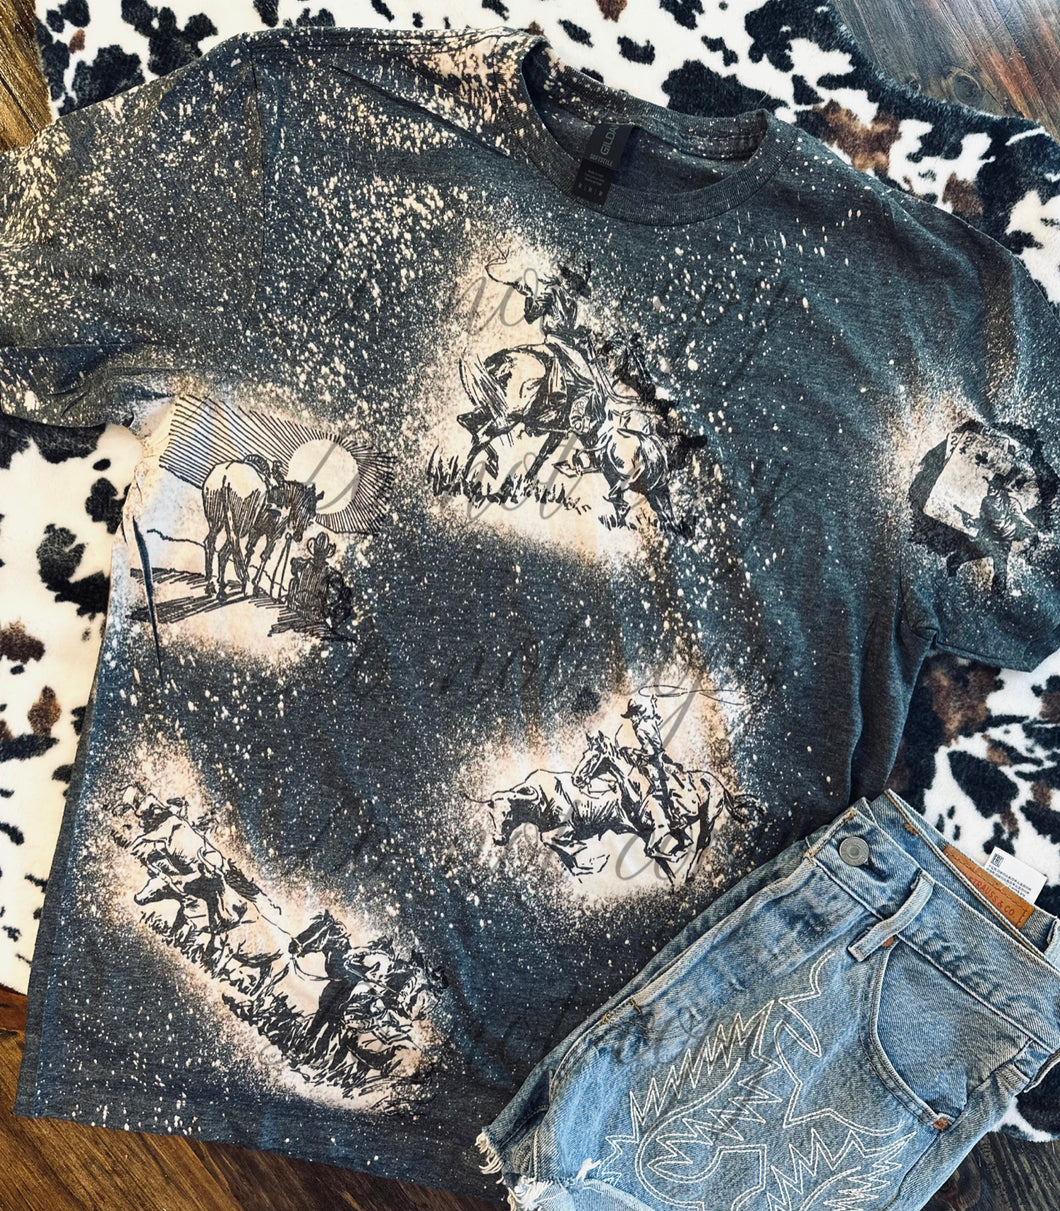 Charcoal bleached vintage patch cowboy graphic tee or sweatshirt graphic tee or sweatshirt graphic tee or sweatshirt - Mavictoria Designs Hot Press Express